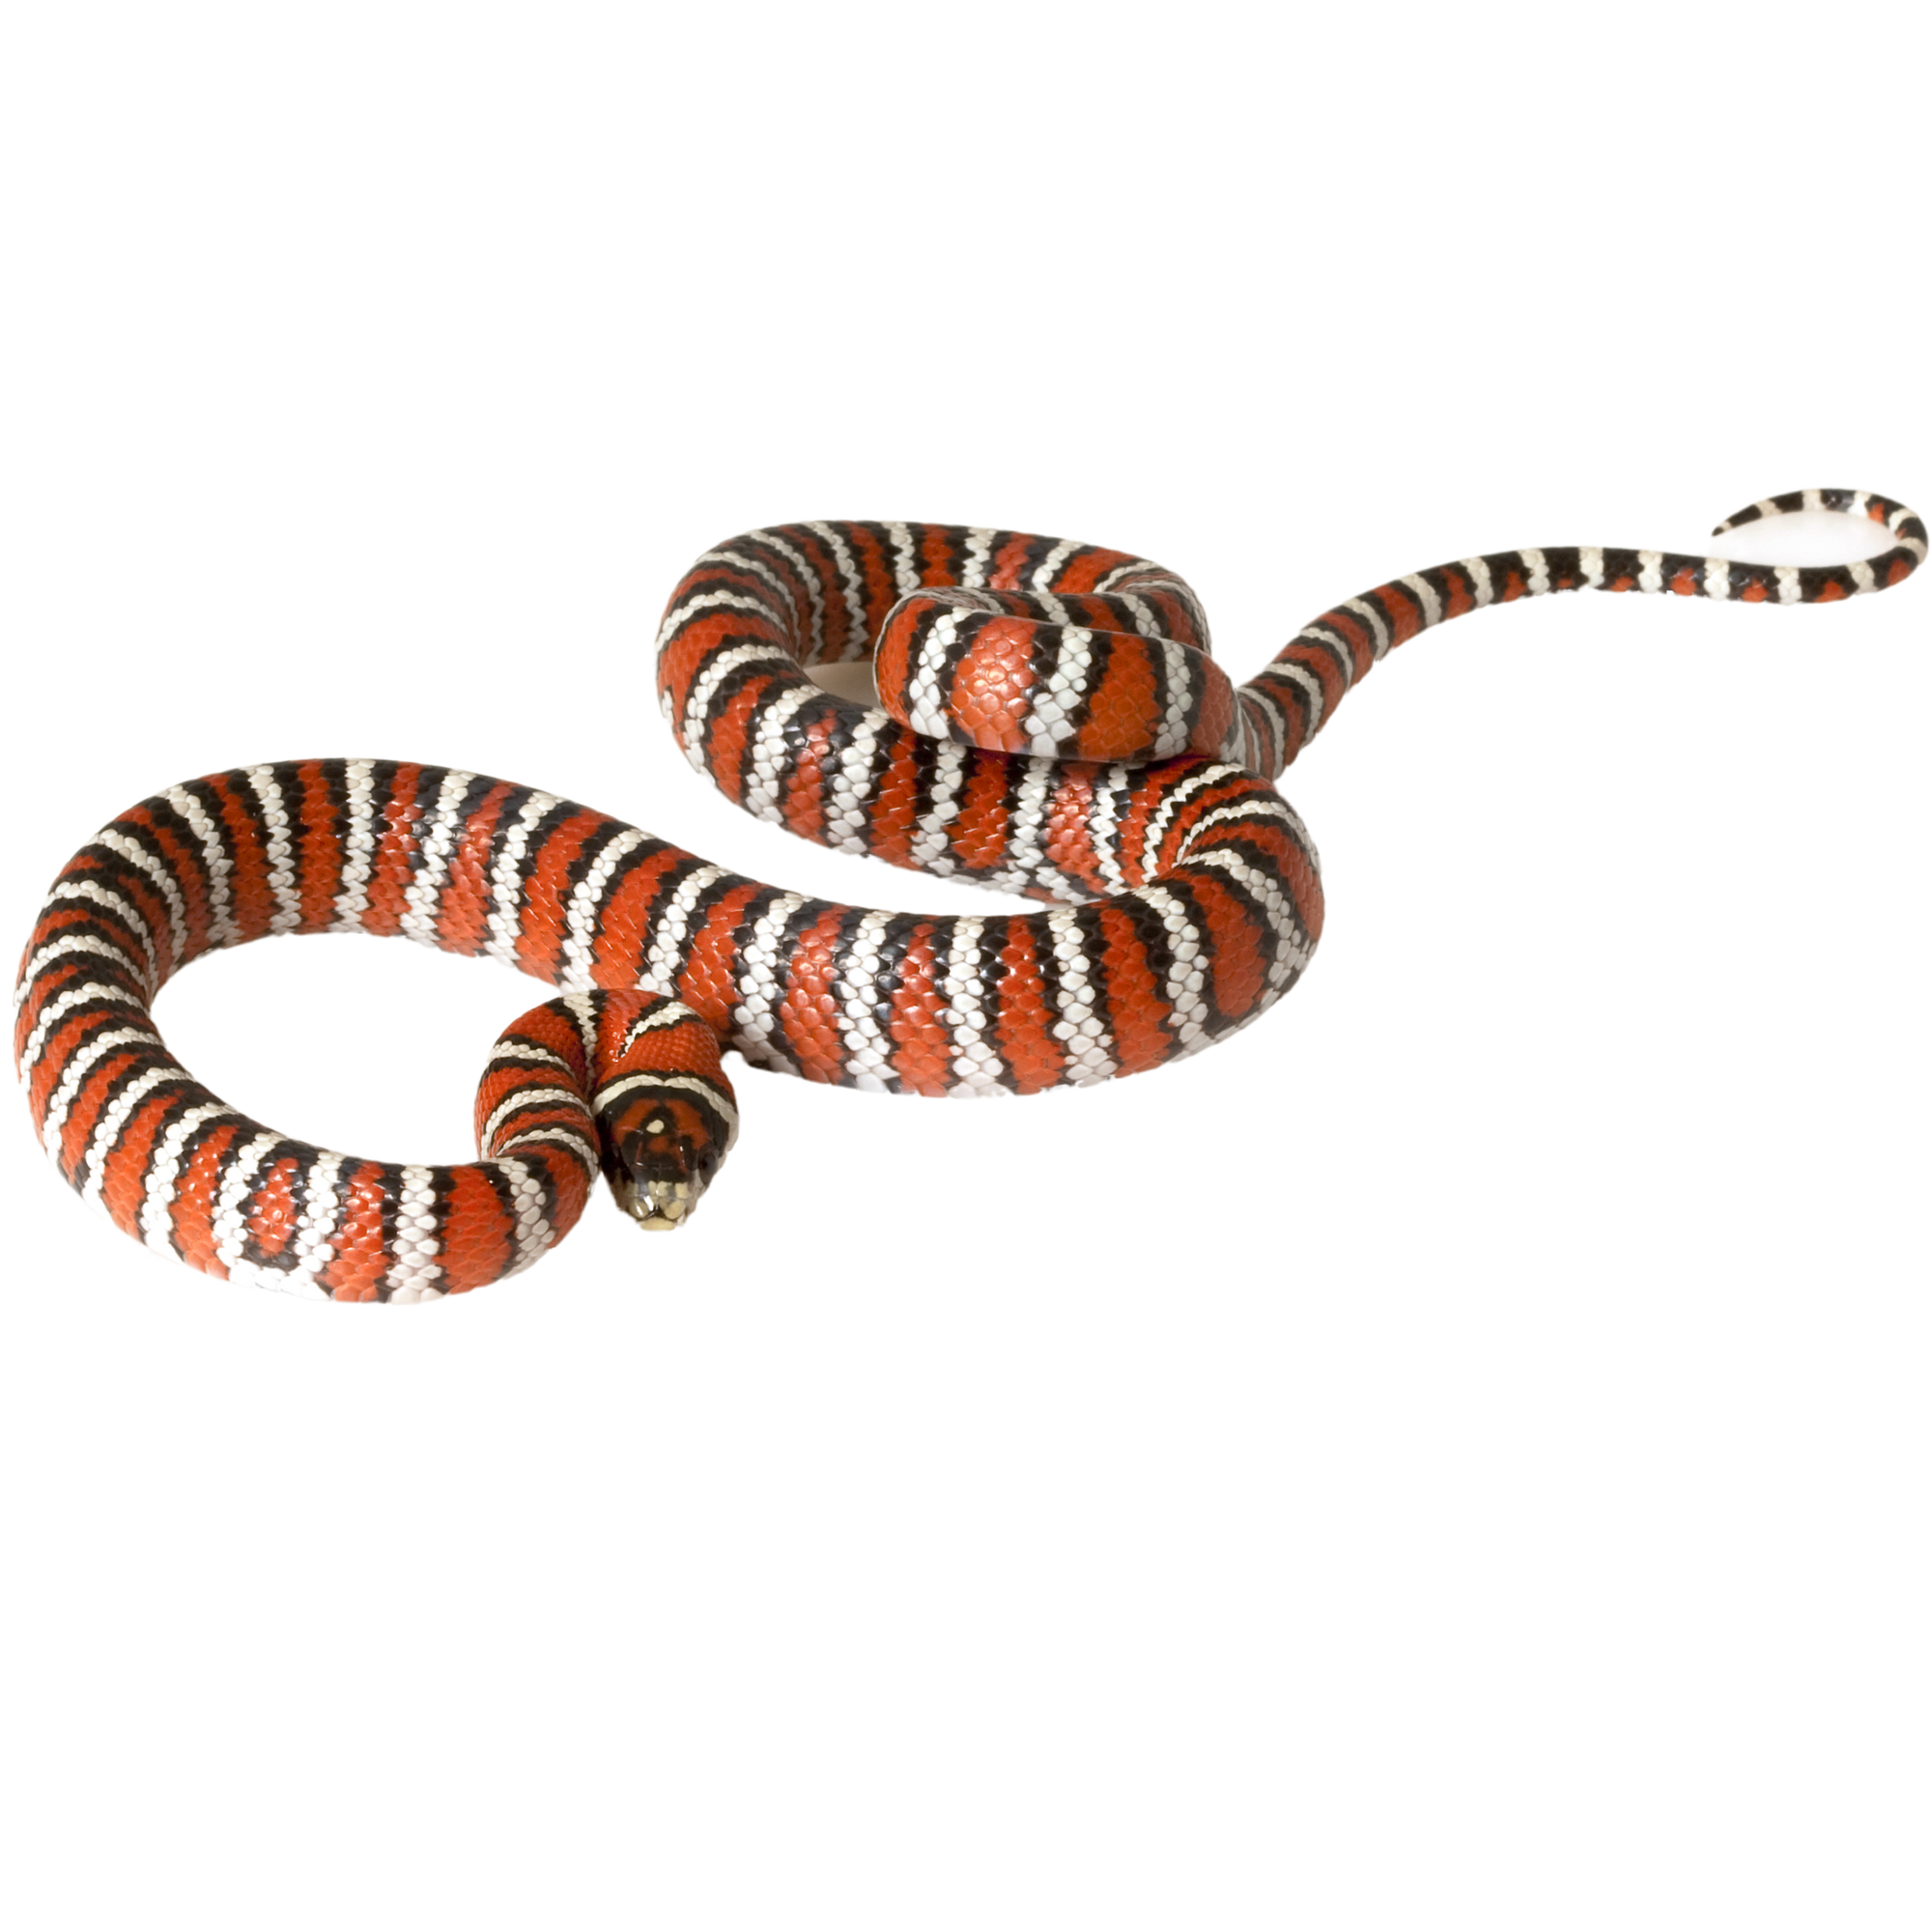 Best substrate for a Knobloch's Mountain Kingsnake Lampropeltis knoblochi ReptiChip